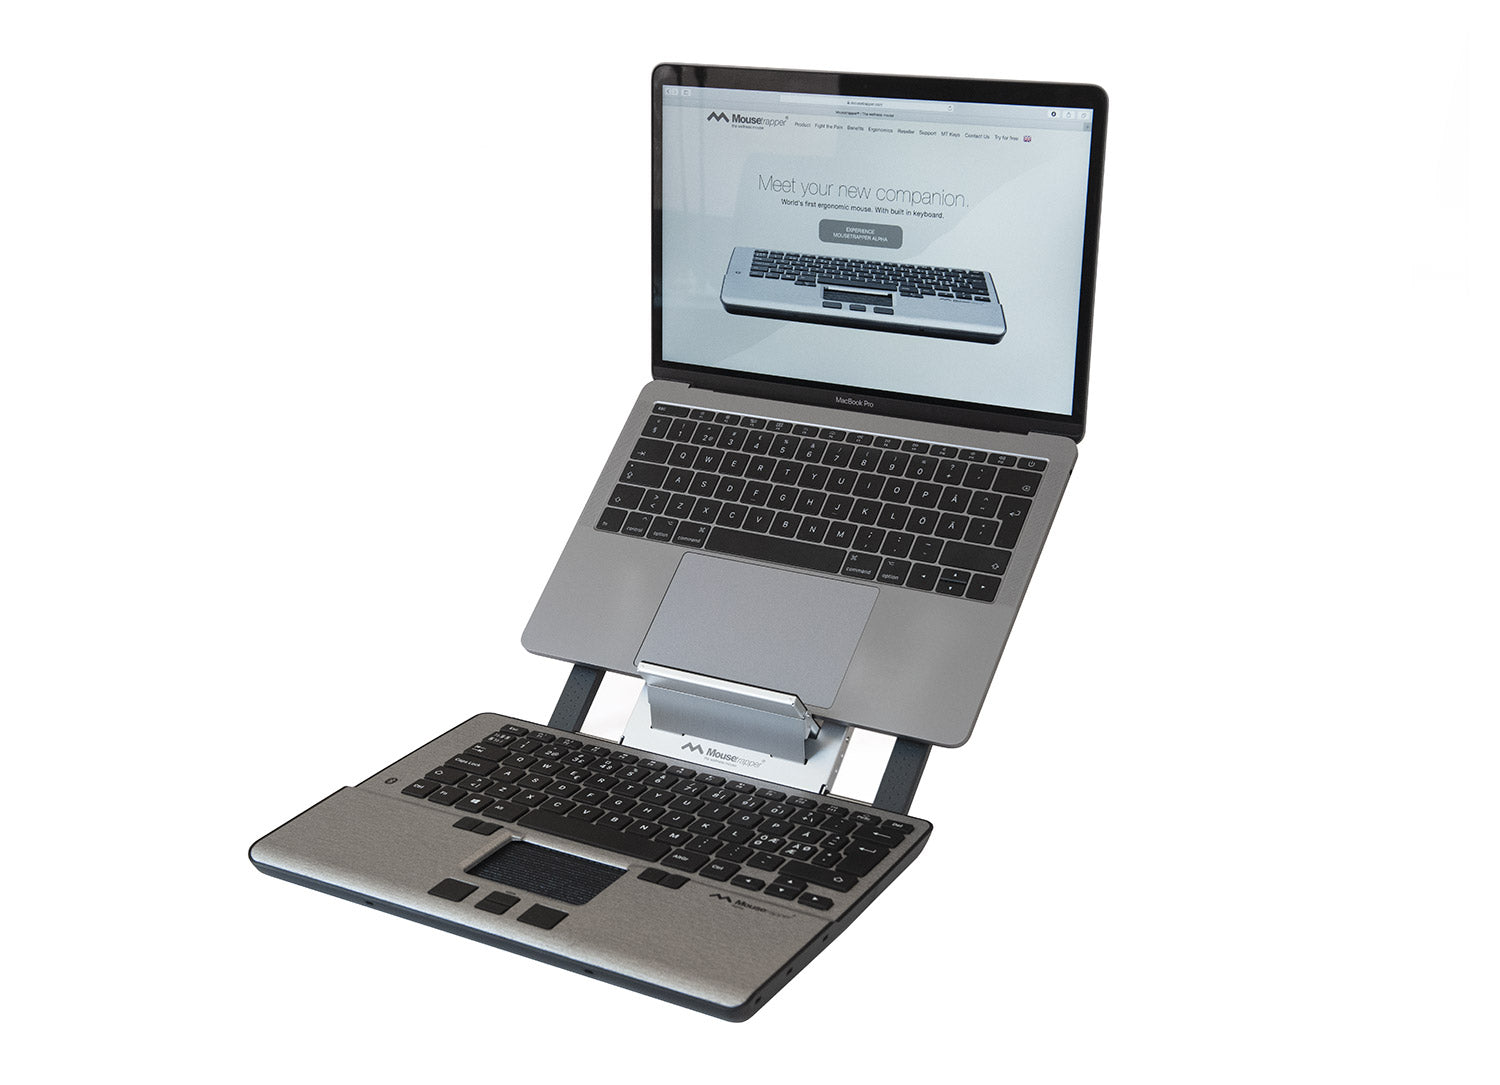 Laptop stand | Mousetrapper